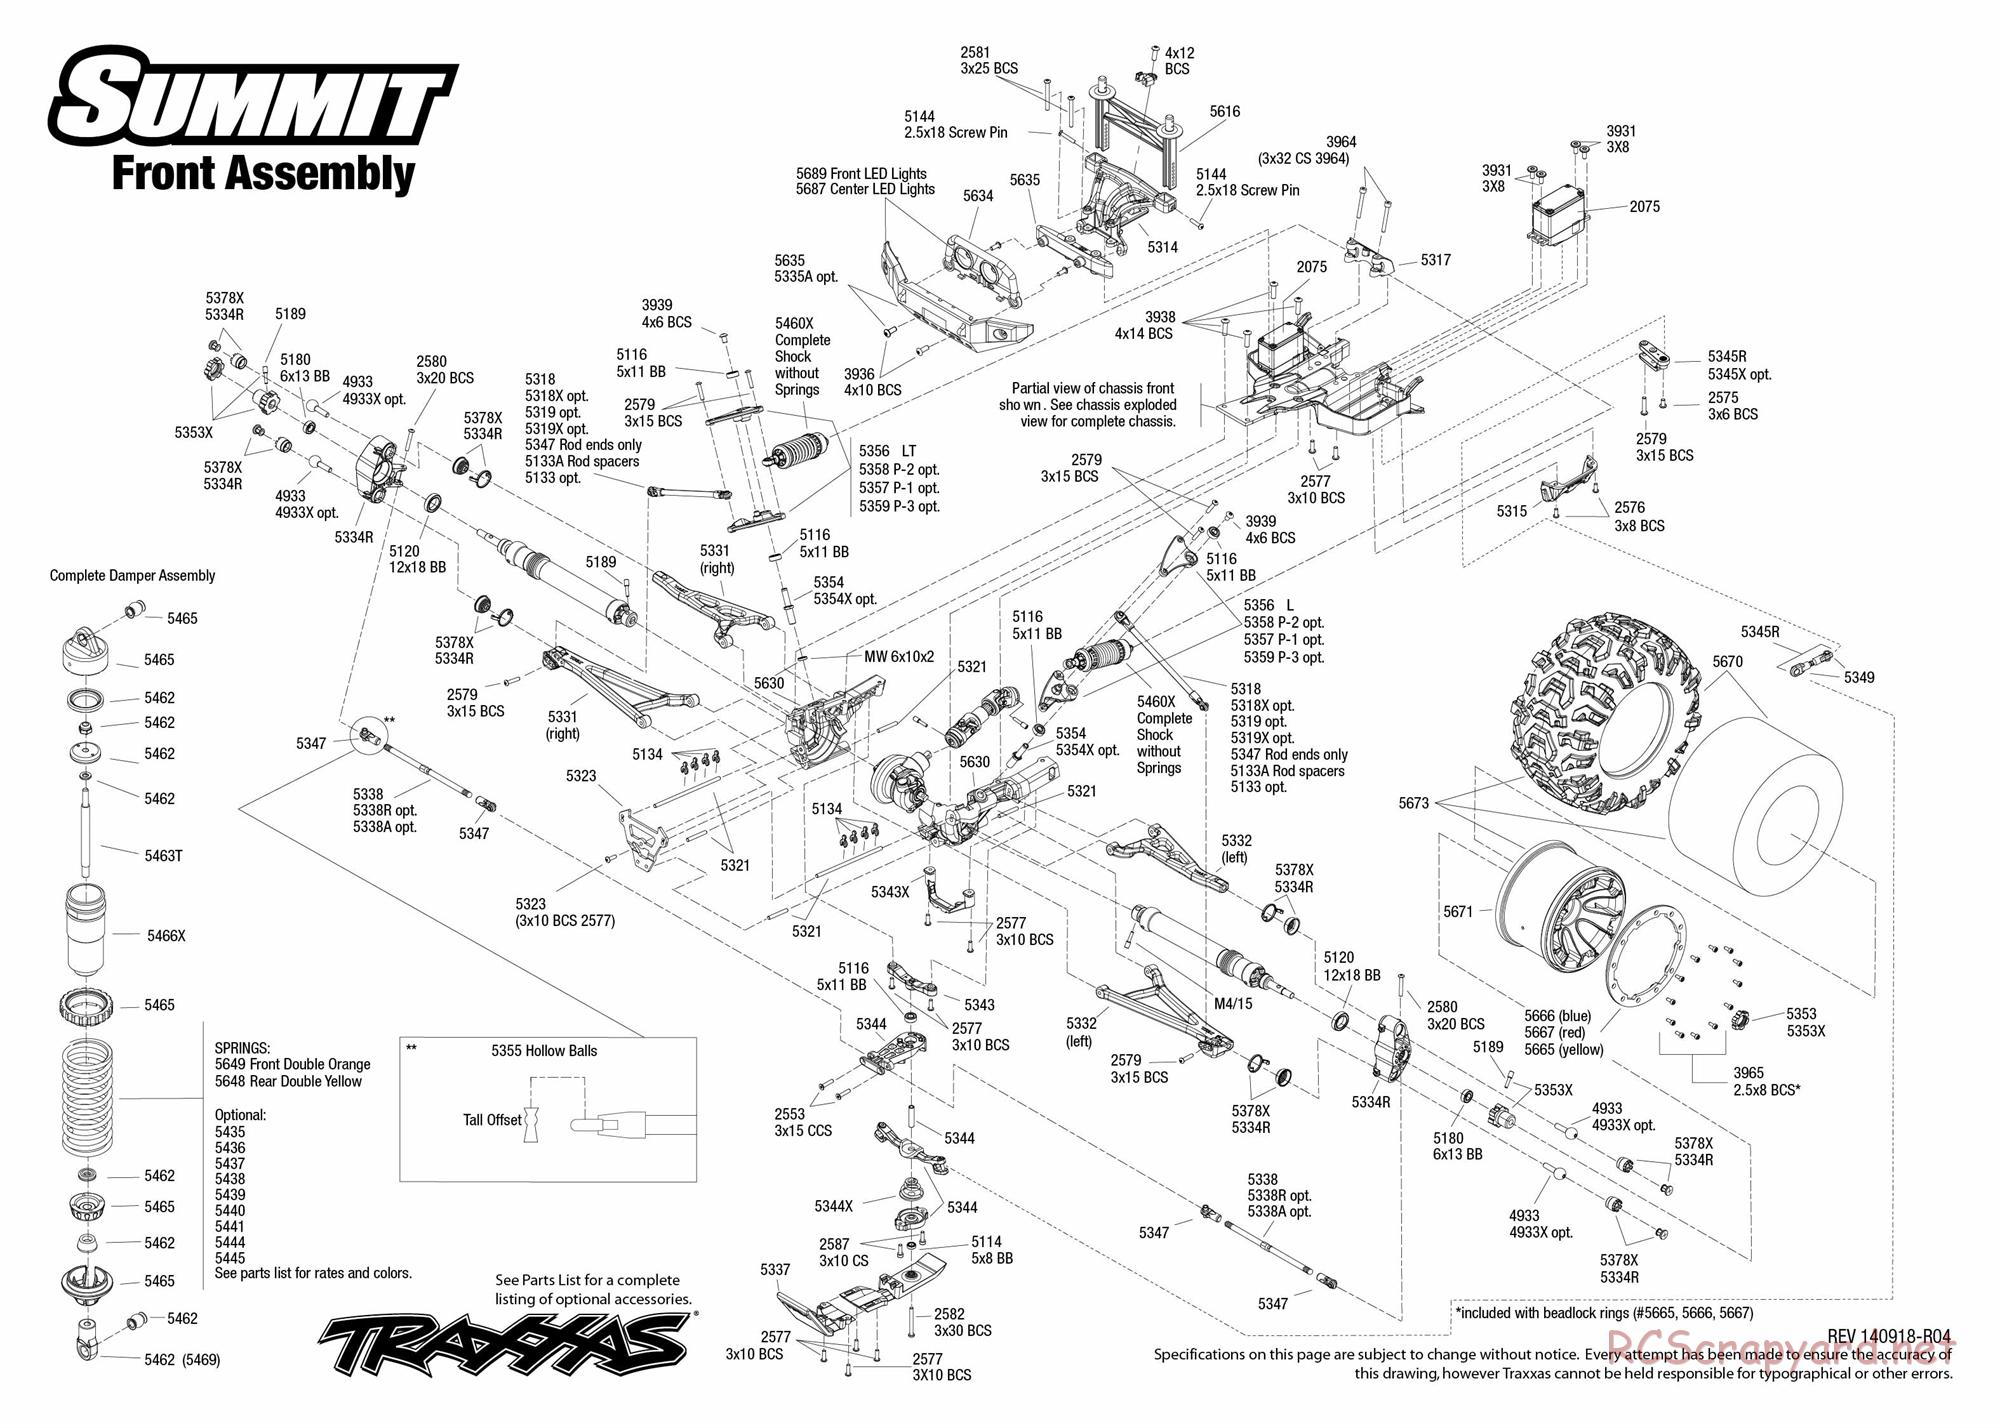 Traxxas - Summit - Exploded Views - Page 3